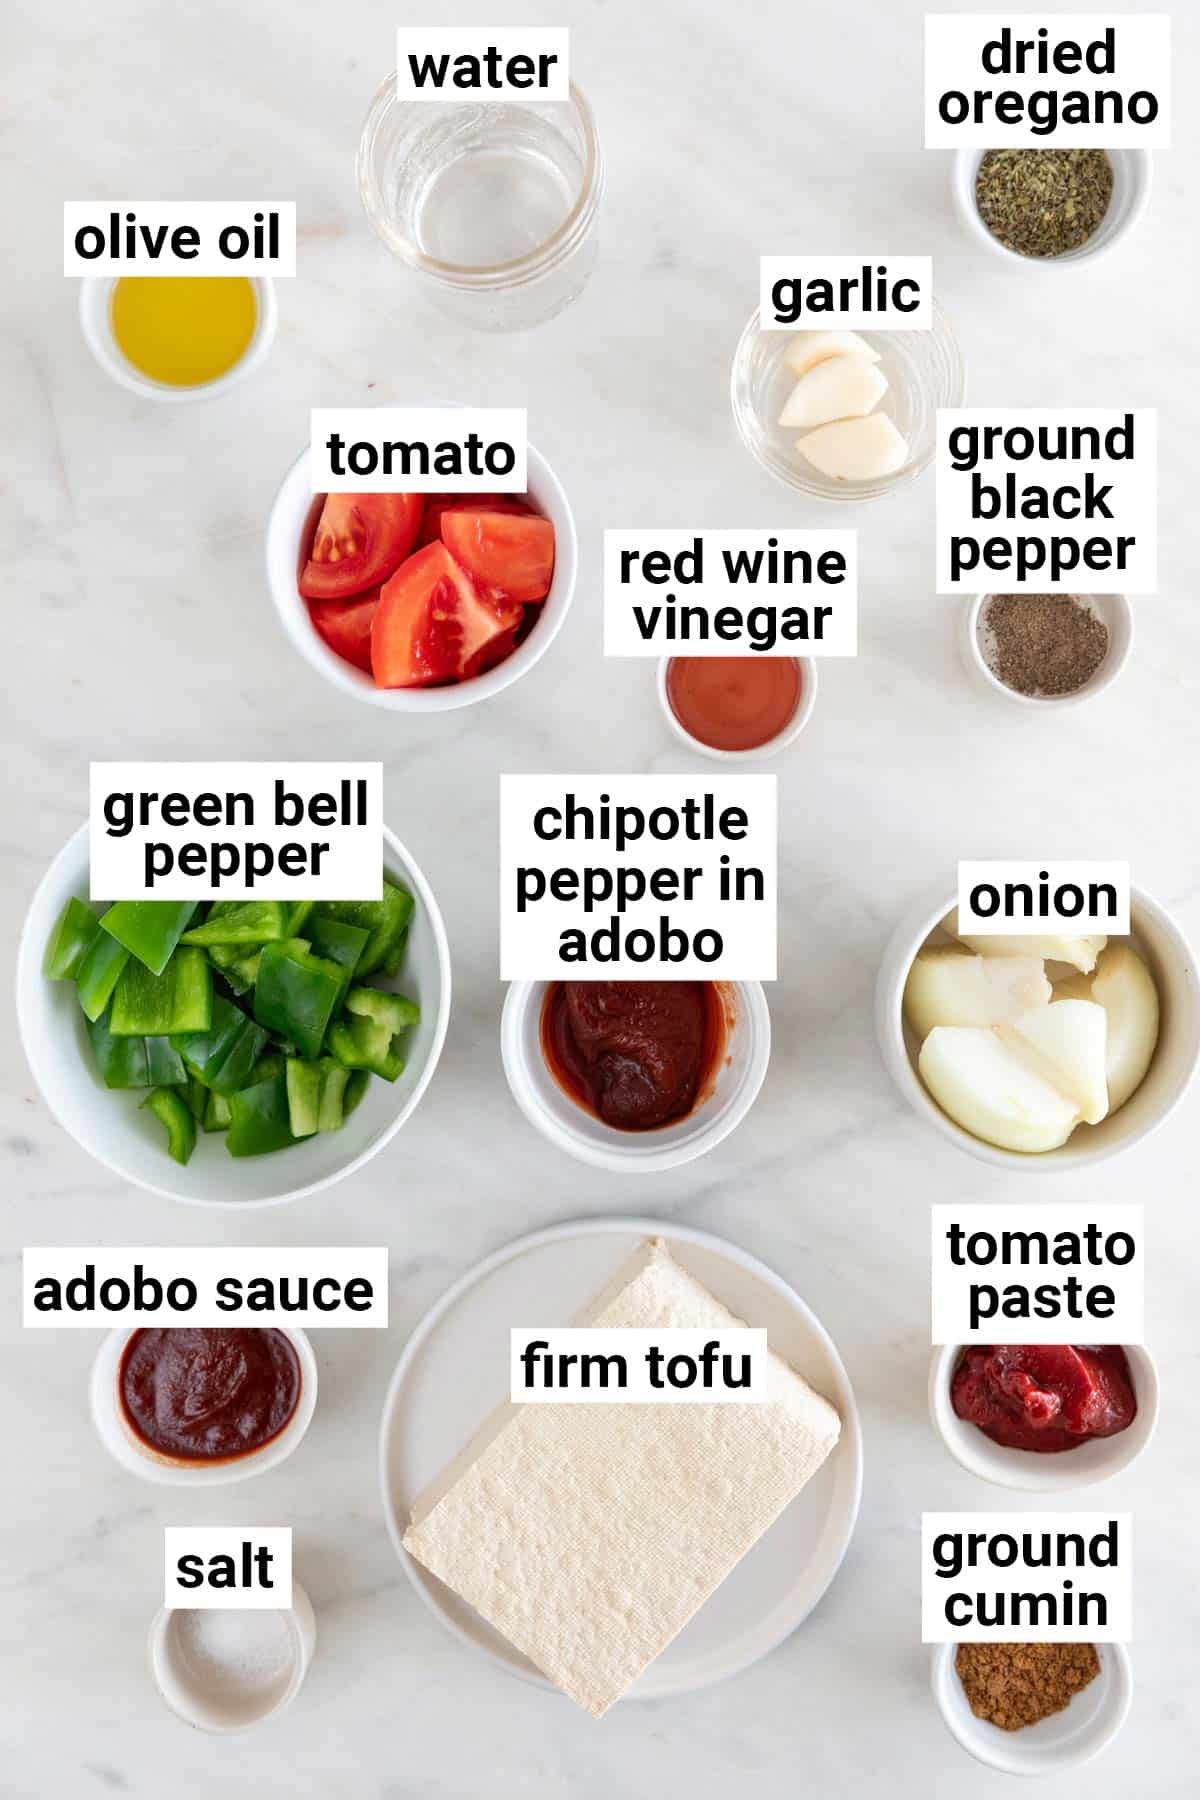 Ingredients needed to make Chipotle sofritas.